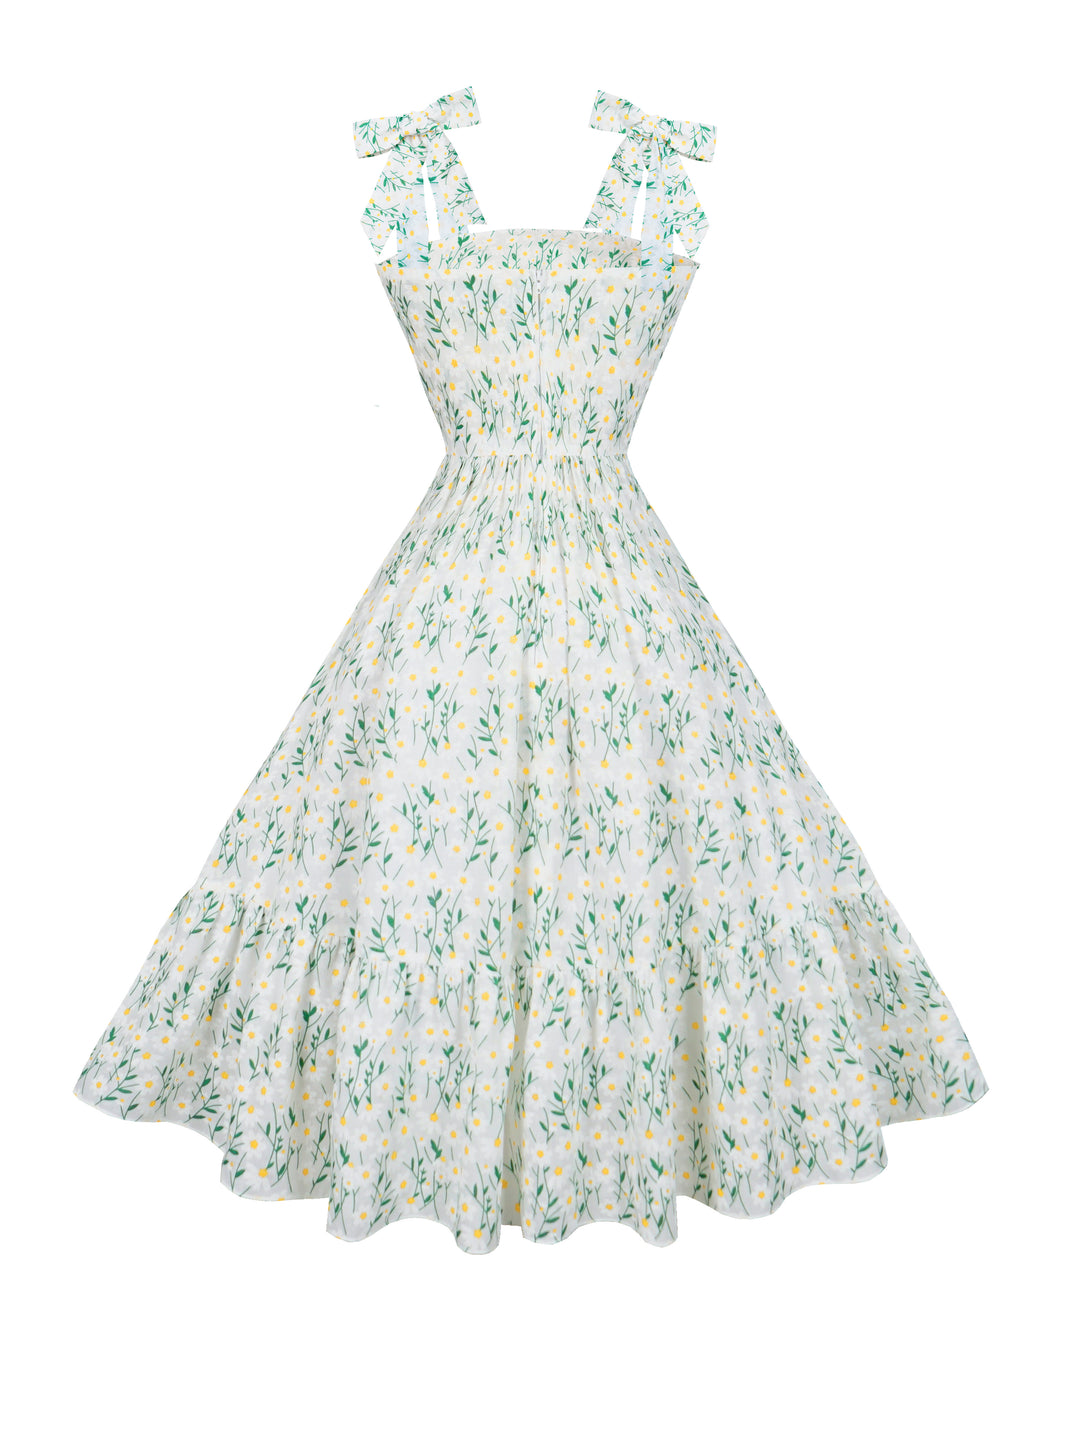 MTO - Chelsea Dress "Daisies in the Dell"